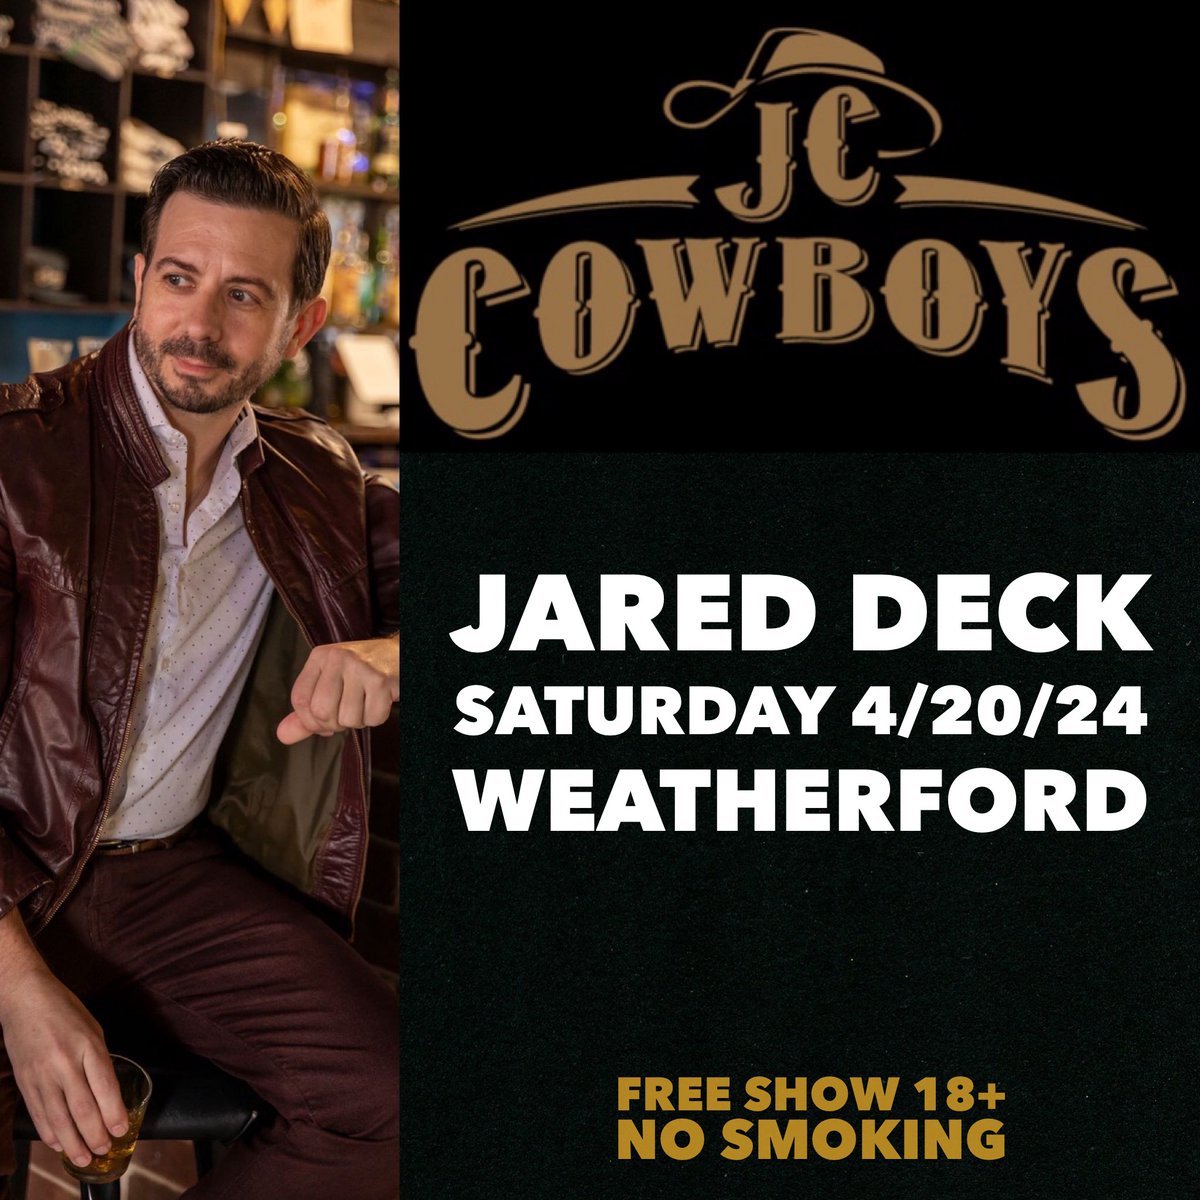 Jared is back with his band! Grab dinner and party with us at @JCCowboys. Doors at 4pm, show at 8:30pm. 18+, no cover, no smoke.

#weatherfordok #dubtown #jccowboys #oklahomamusic #texasmusic #reddirtmusic #americanamusic #clintonok #elkcityok